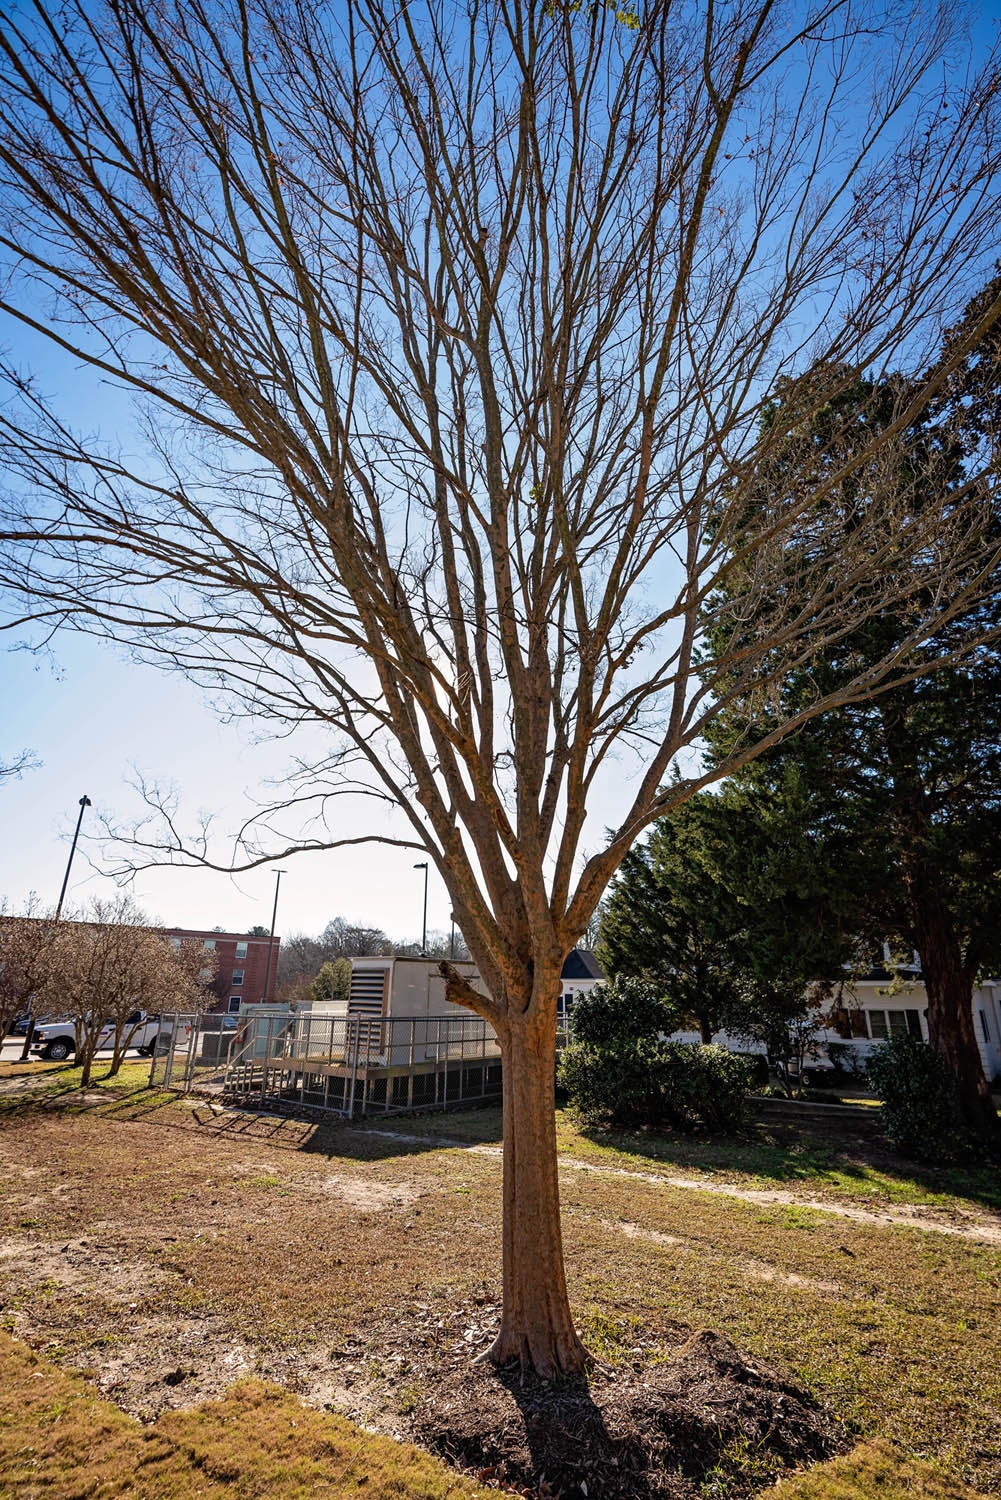 •This zelkova is one of 25 trees that were relocated rather than cut down during the construction of the new student center. 